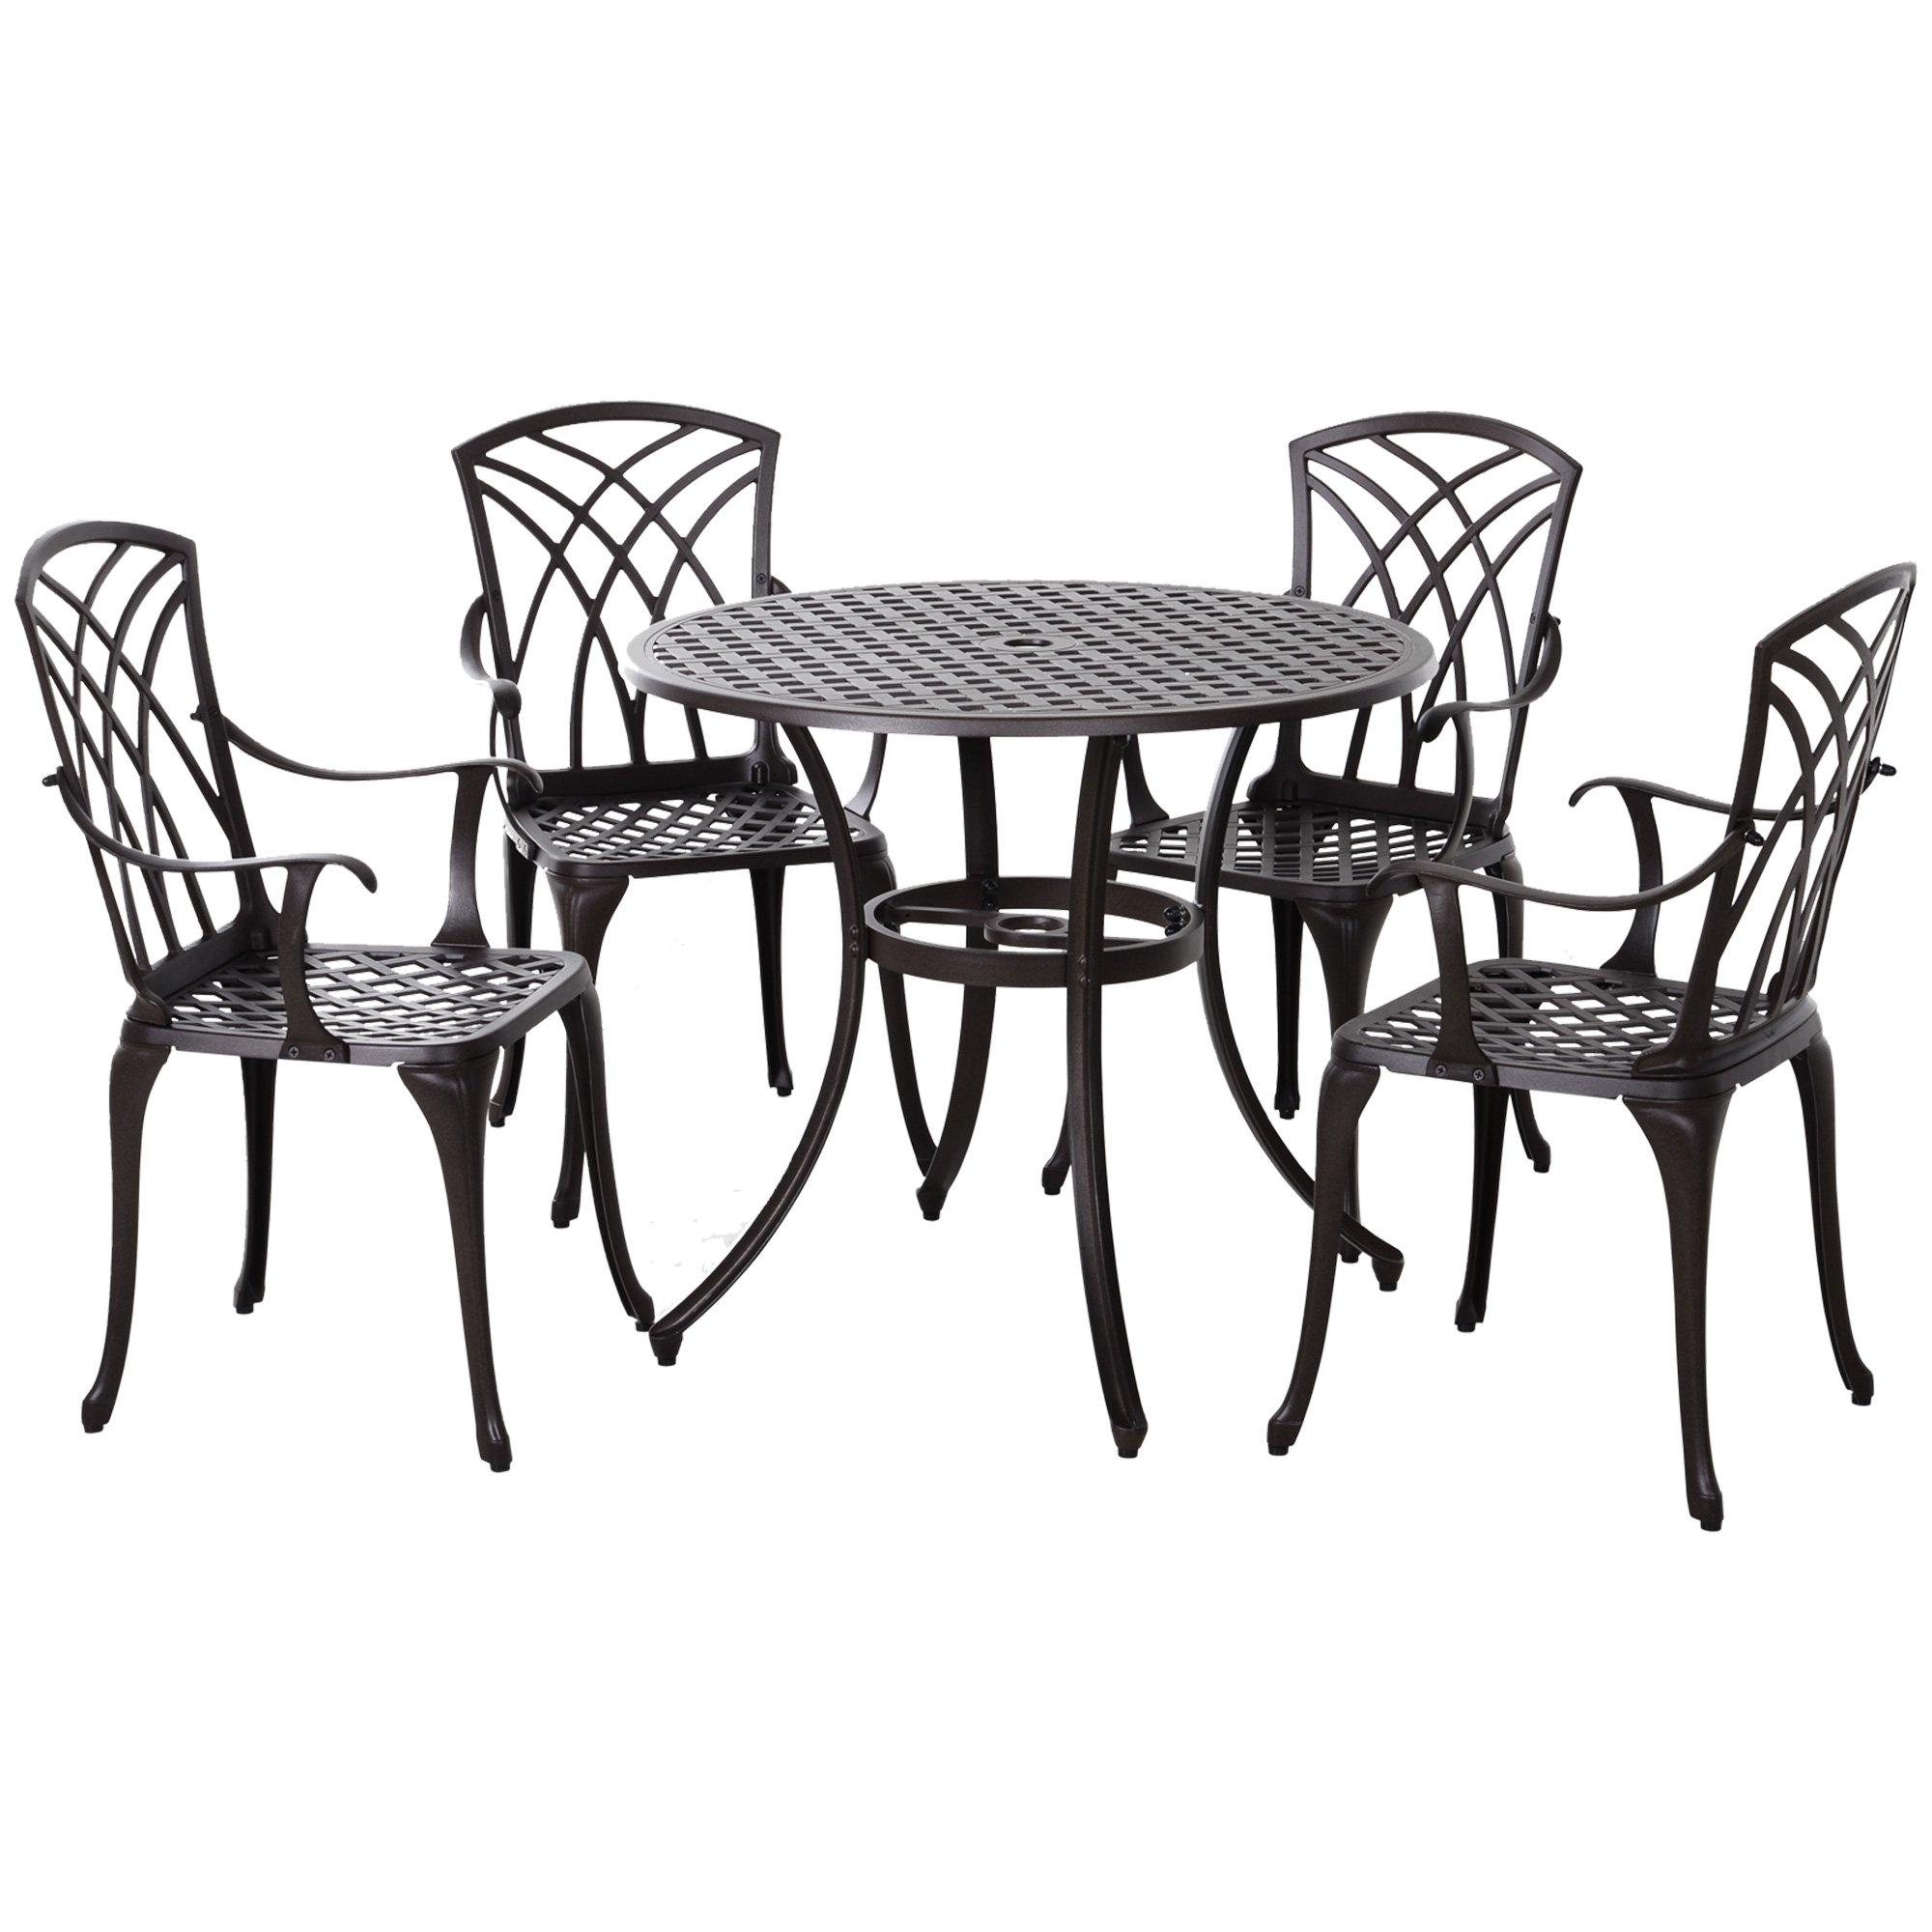 5 PCs Coffee Table Chairs Outdoor Garden Furniture Set with Hole